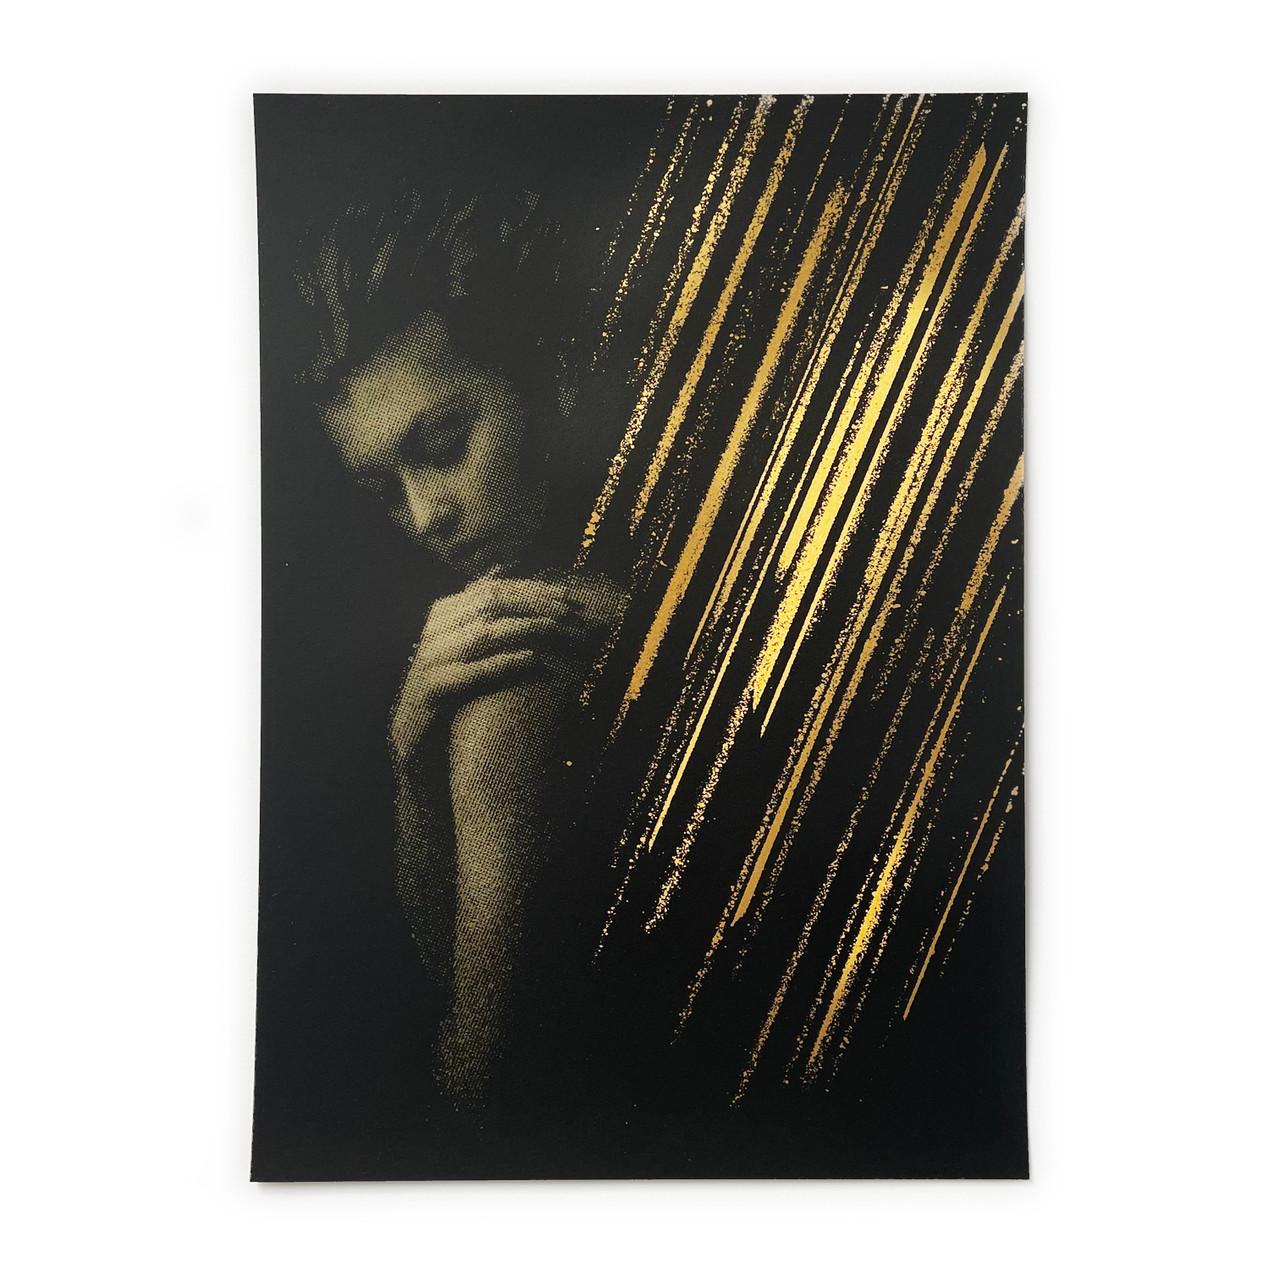 - 4 color hand-pulled screen print 
(the black is printed allowing the specialty paper to show through - girl made up of 3 metallic inks)

(GF Smith) - Peregrina - 'Gold Fever' 290 GSM - this stock has a metallic luster

-Edition of 15

-Signed,